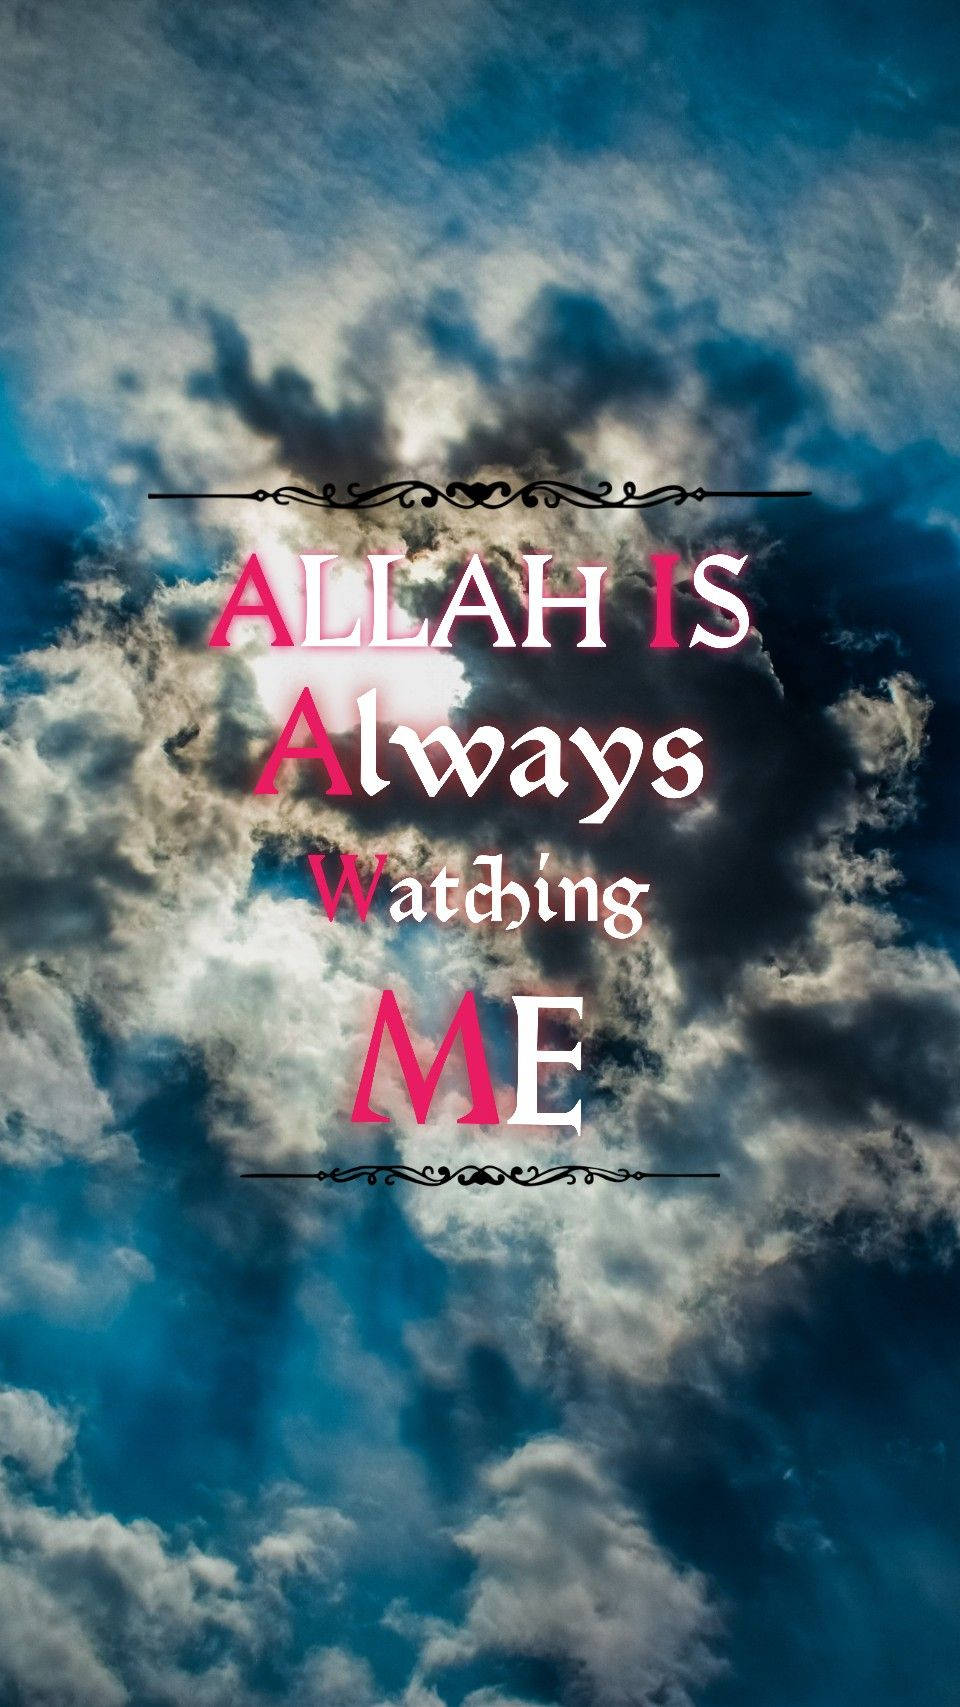 Allah Is Watching Me Message Wallpaper